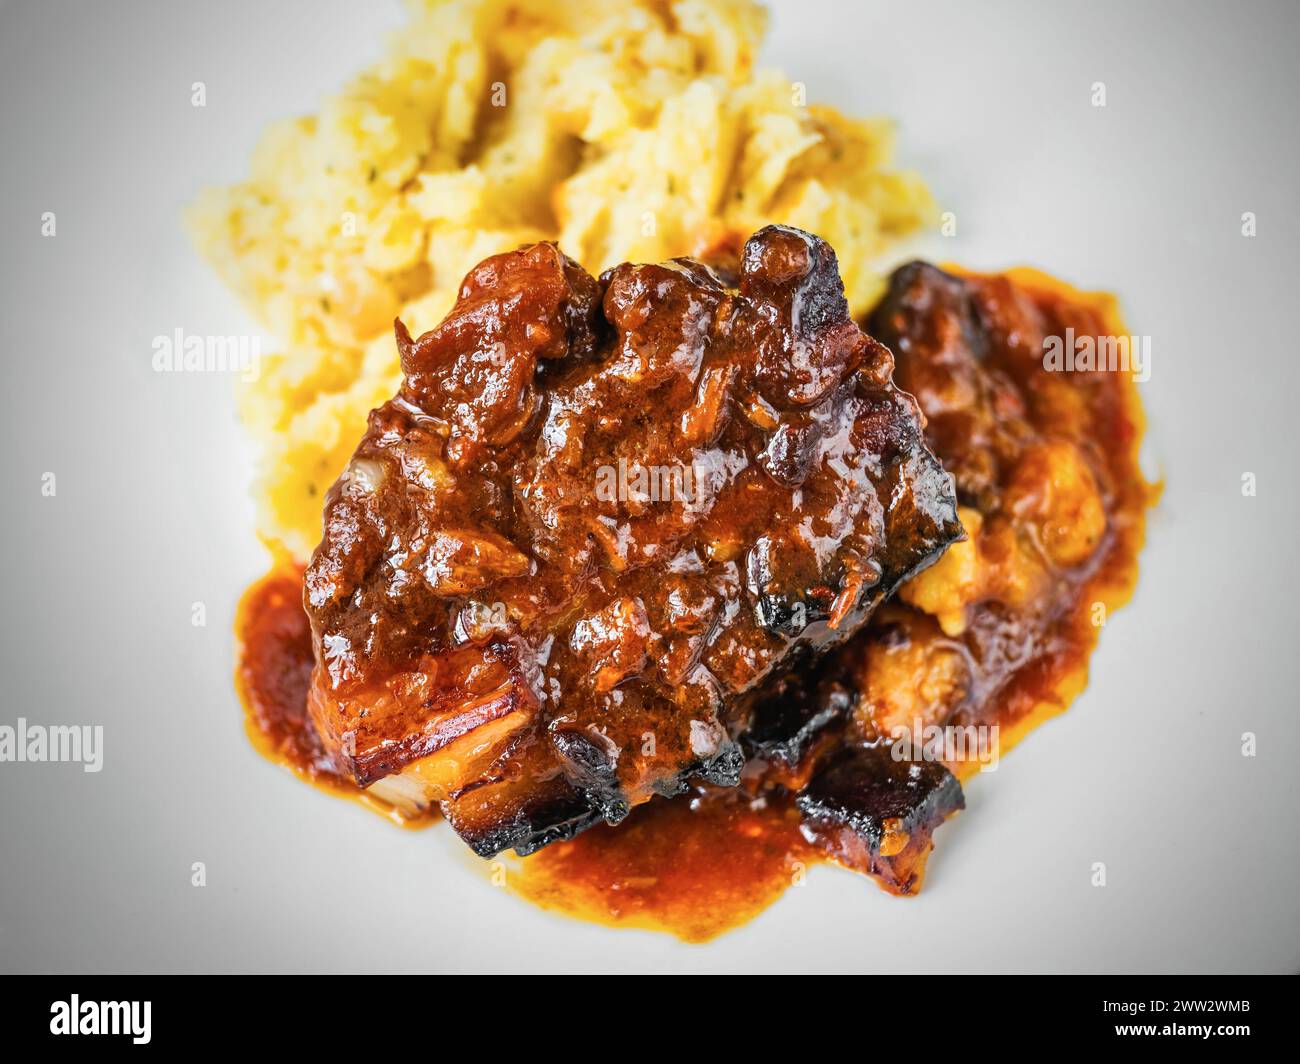 Baked juicy pork rib piece in spicy red sauce with mashed potato, closeup. Stock Photo